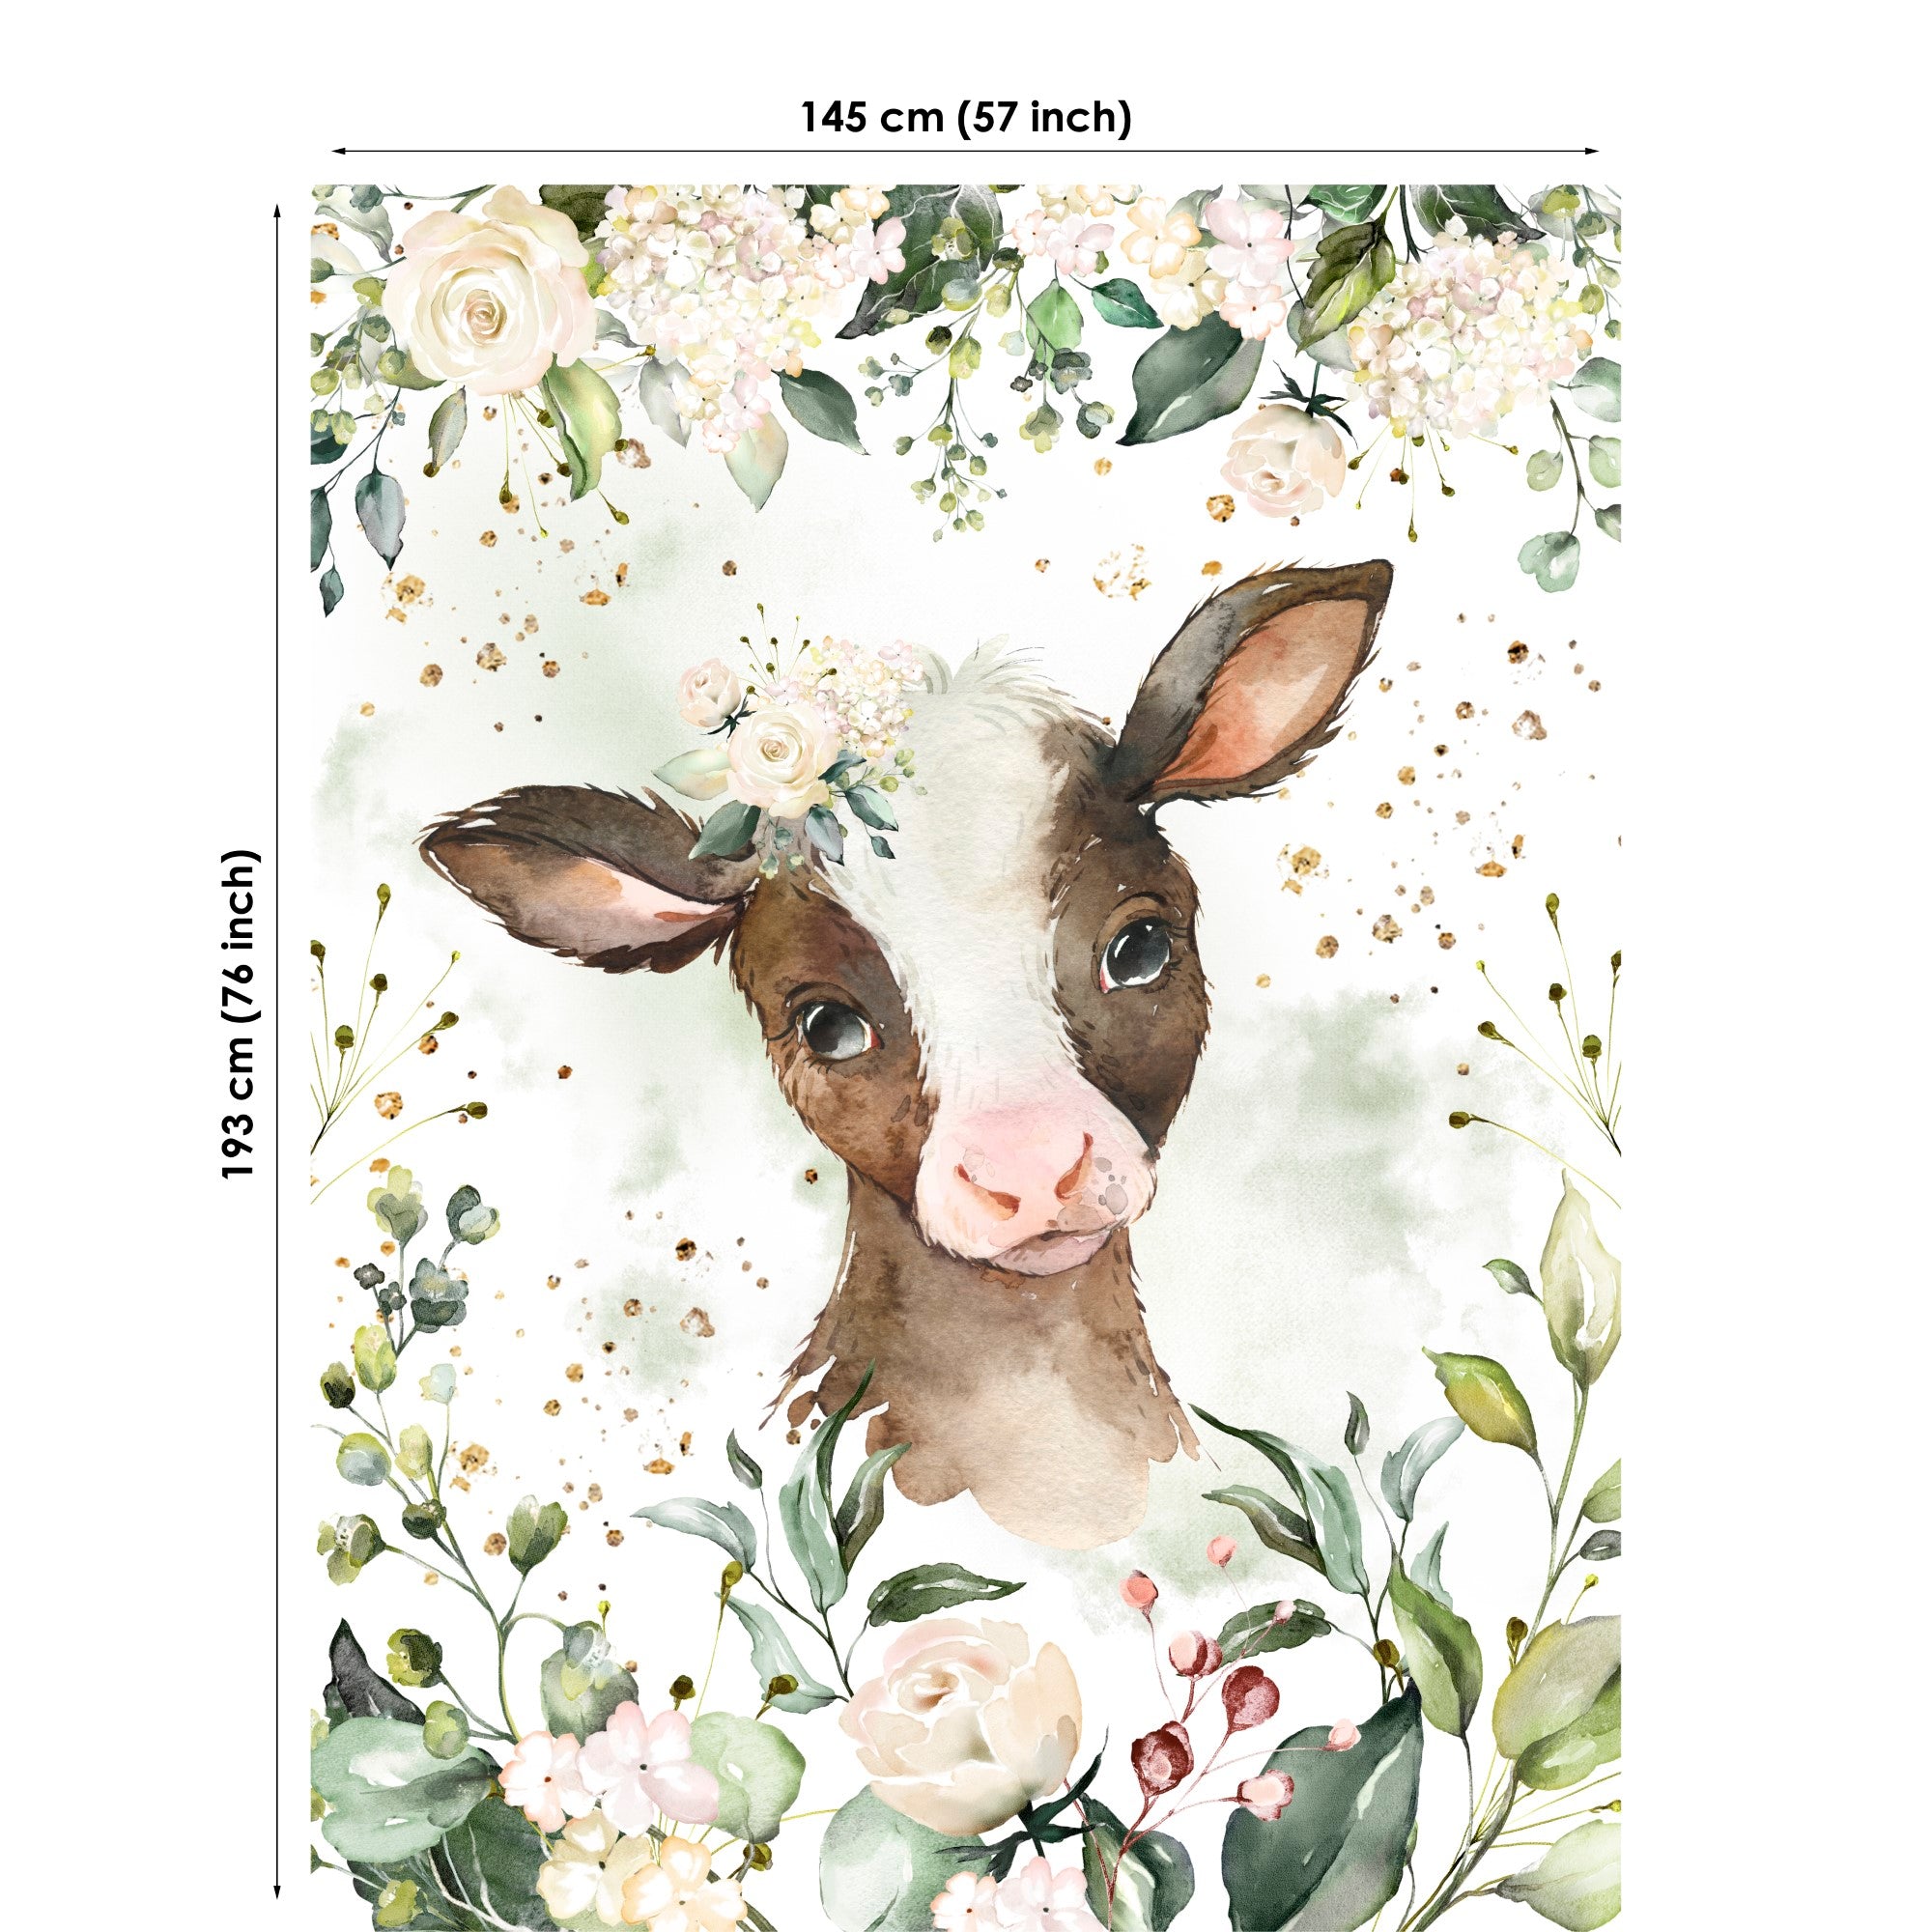 Cute Farm Animals Baby Fabric Panels for Quilting, Baby Quilt Panels, Fabric Panels for Baby Quilts, Fabric Panels for Quilts, Quilting Fabric, Quilt Material, Blanket Making, DIY Sewing Projects